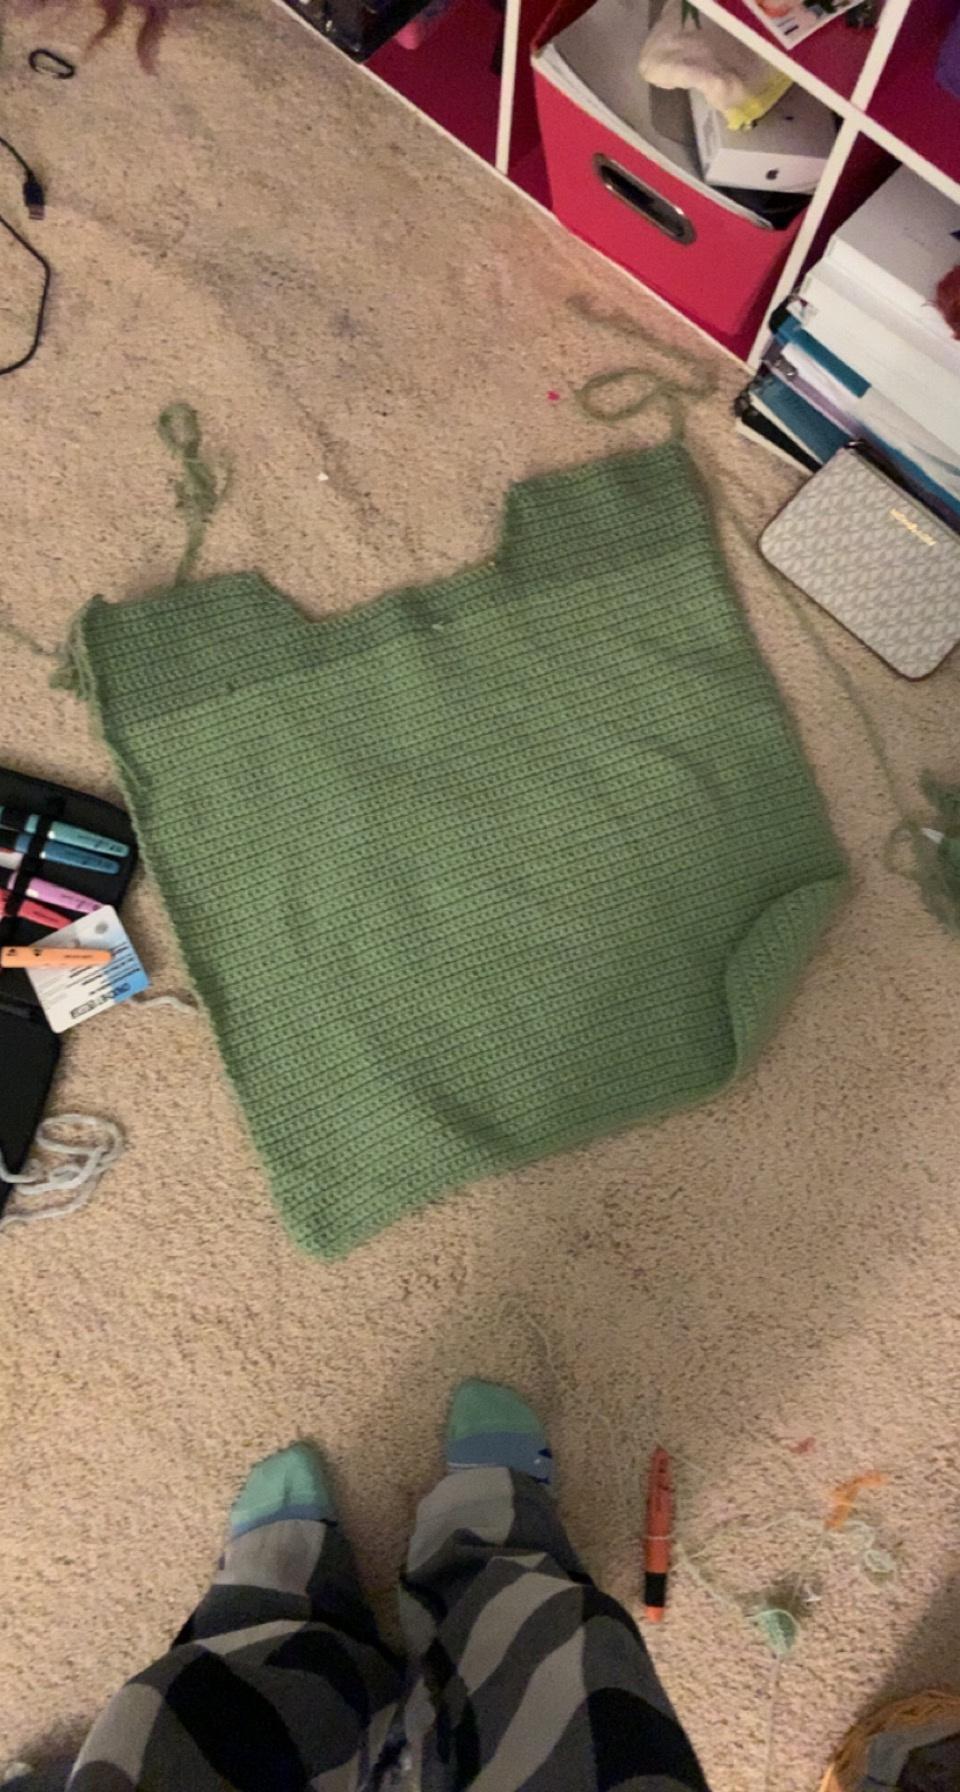 Carried out the main panel of my sweater I’m crocheting!